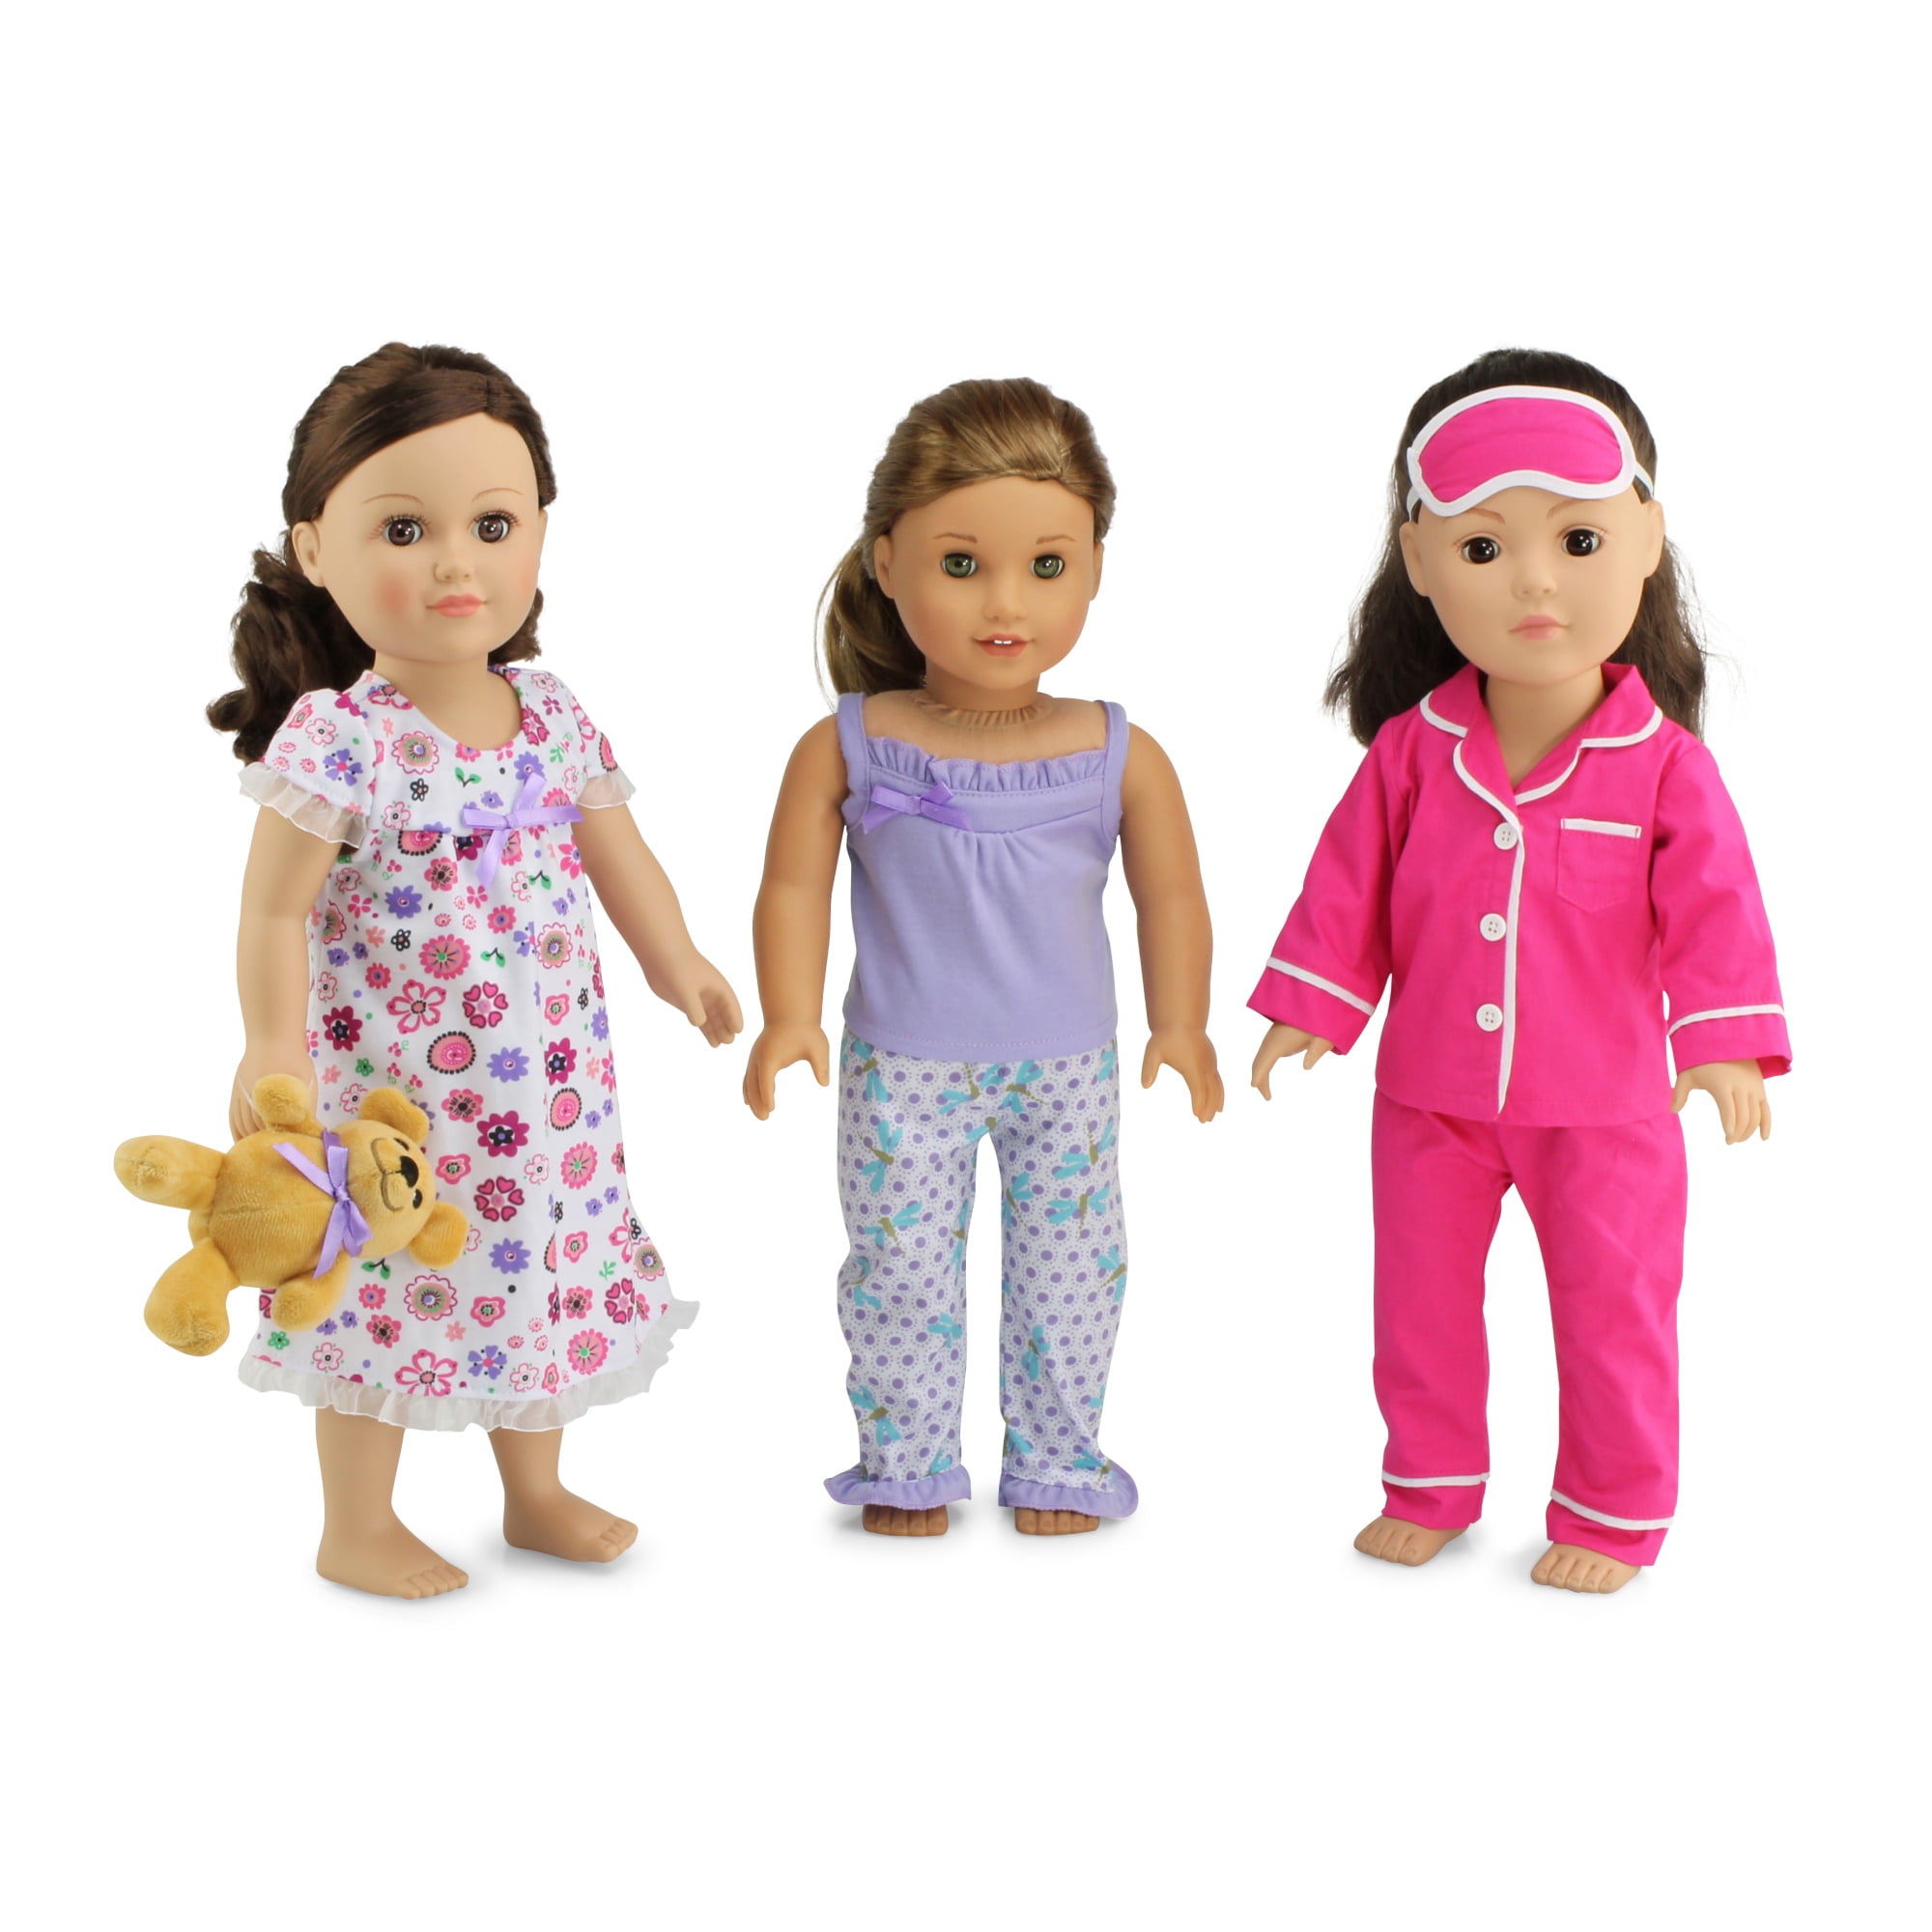 Miunana 4 Pcs Fashion Clothes And Pants For 14-16 Inch Baby Dolls For Newborn 